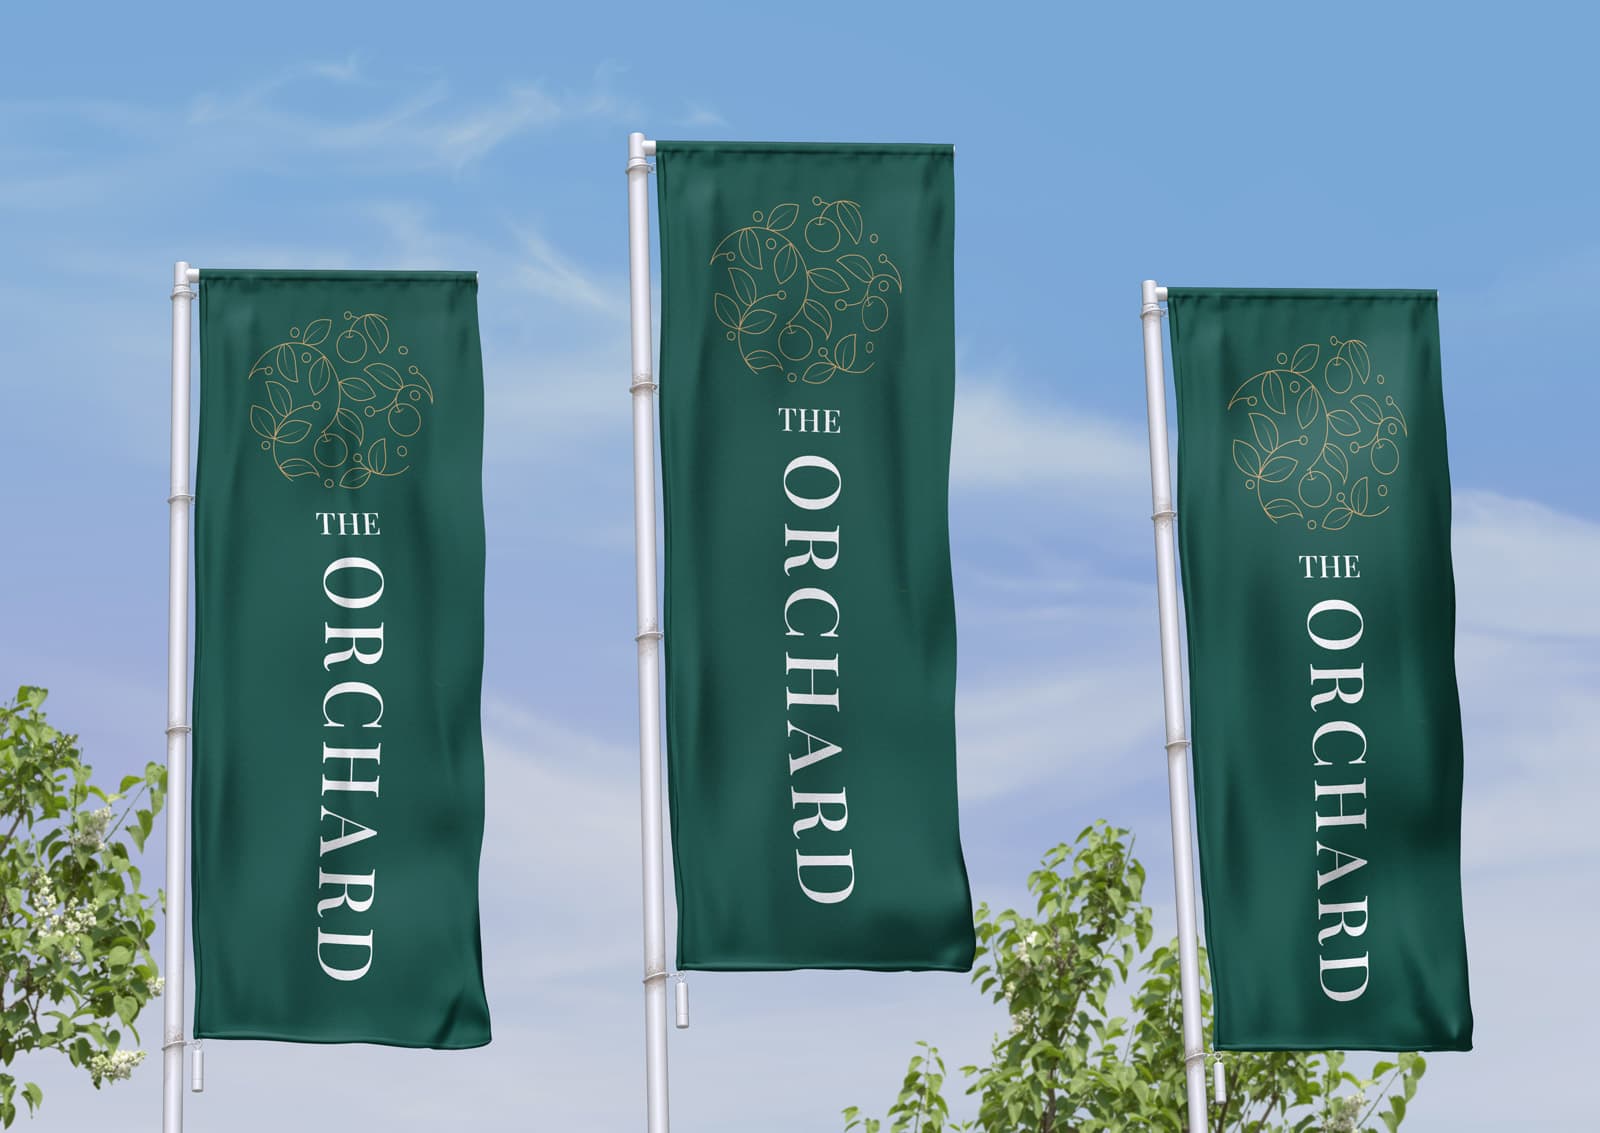 The Orchard signage design